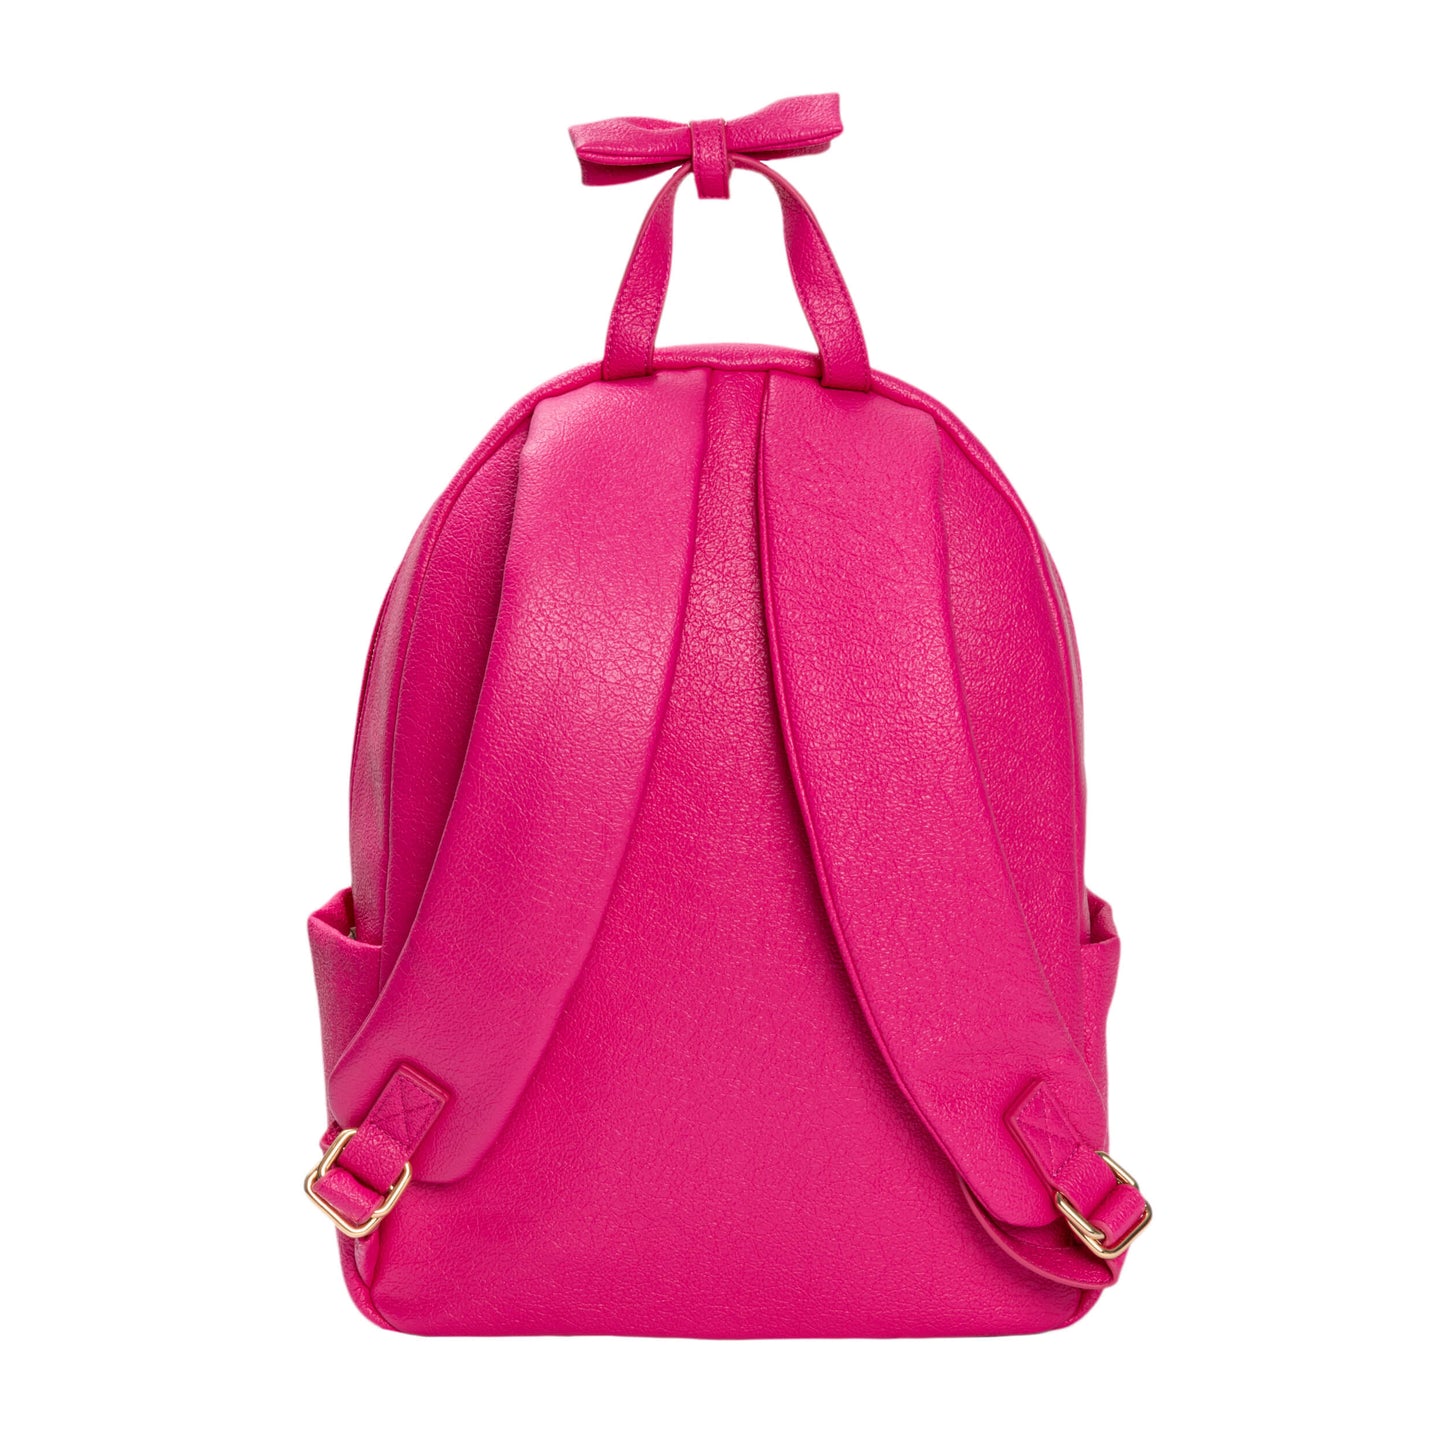 The Taly Backpack - Brave Pink (Customizable)